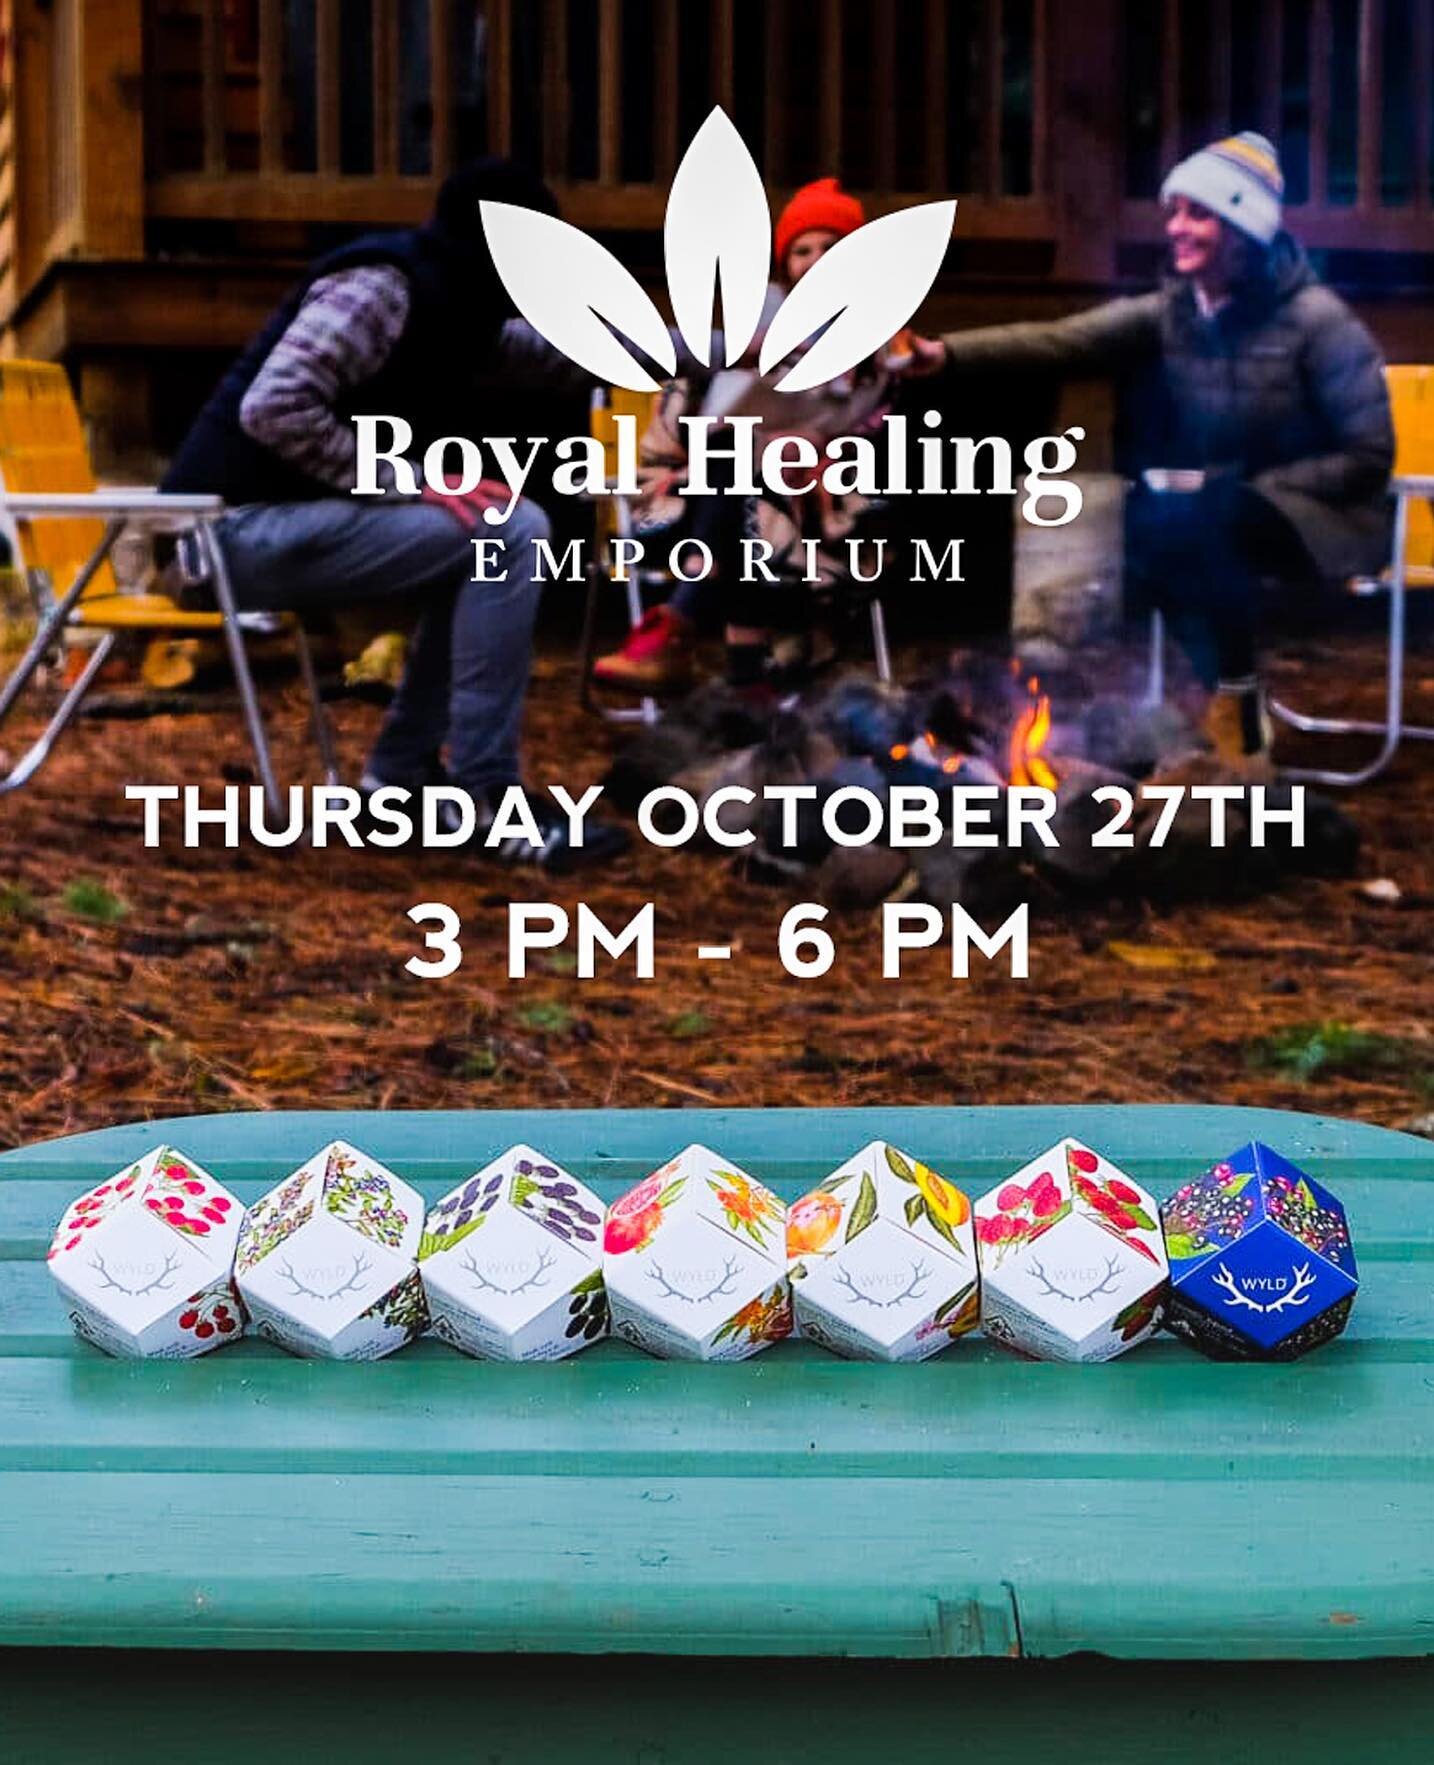 Today in the house we have Wyld from 3PM to 6PM 👌 swing by and say hi! #royalhealingemporium